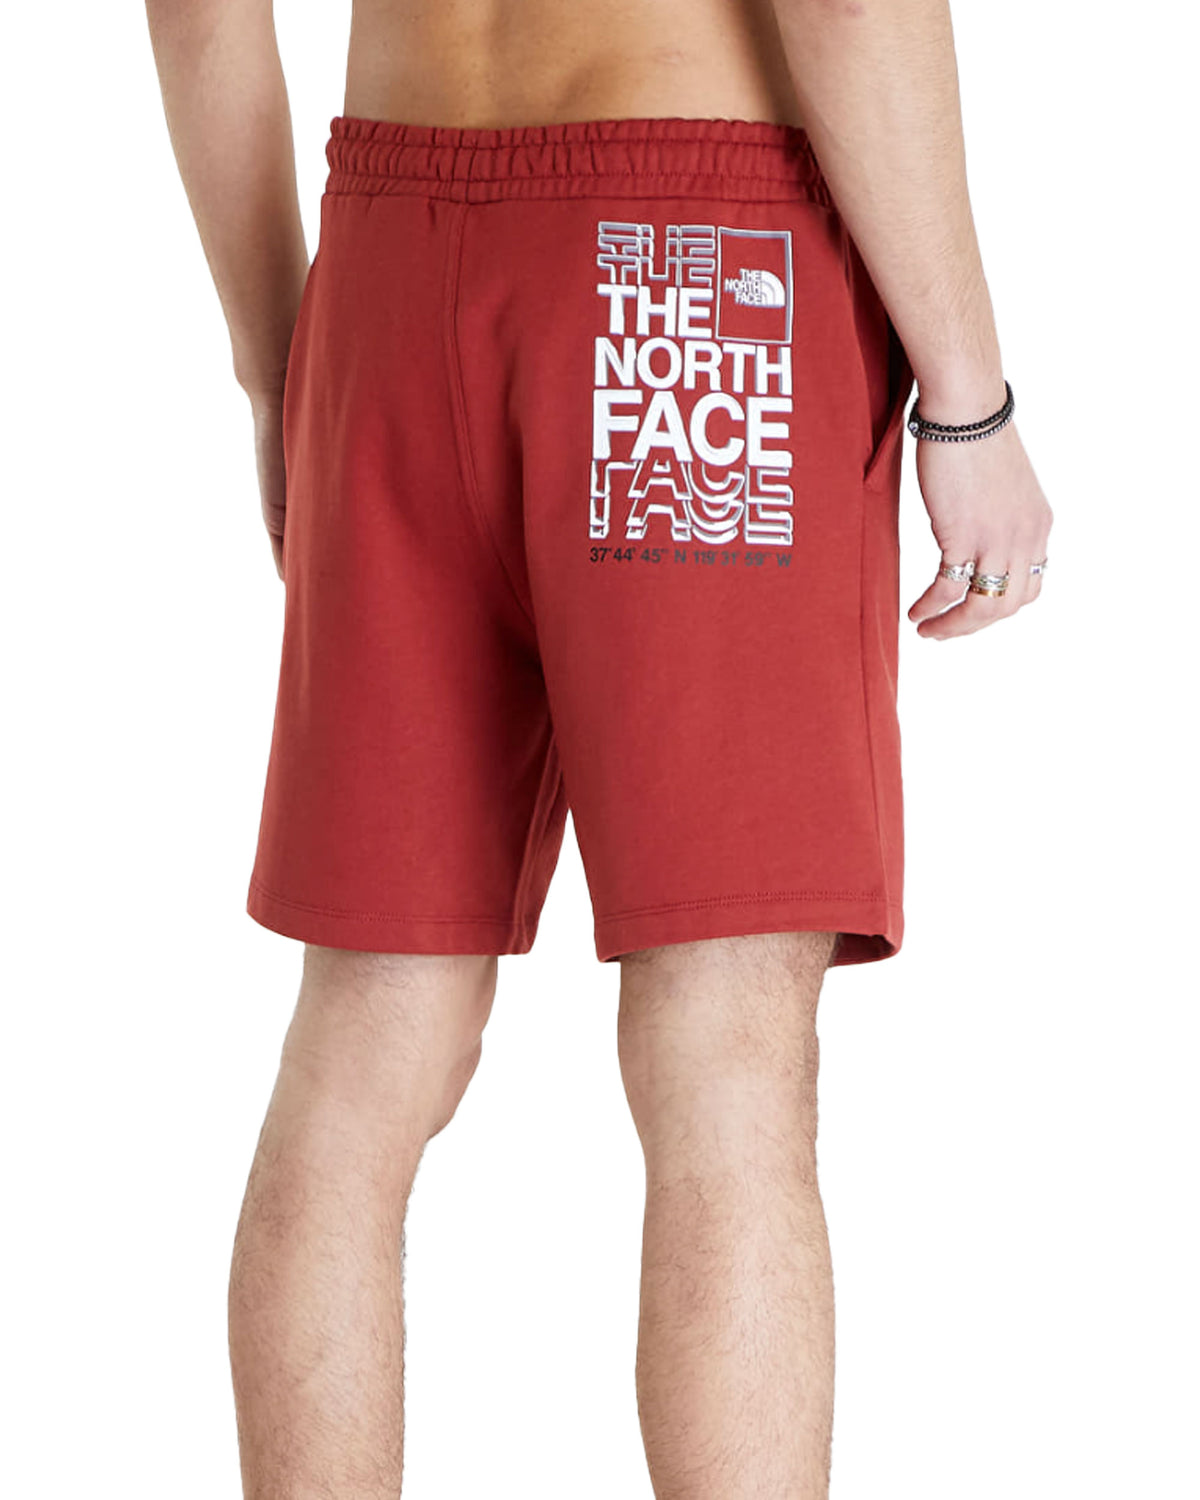 Man Shorts The North Face Coordinate Iron Red